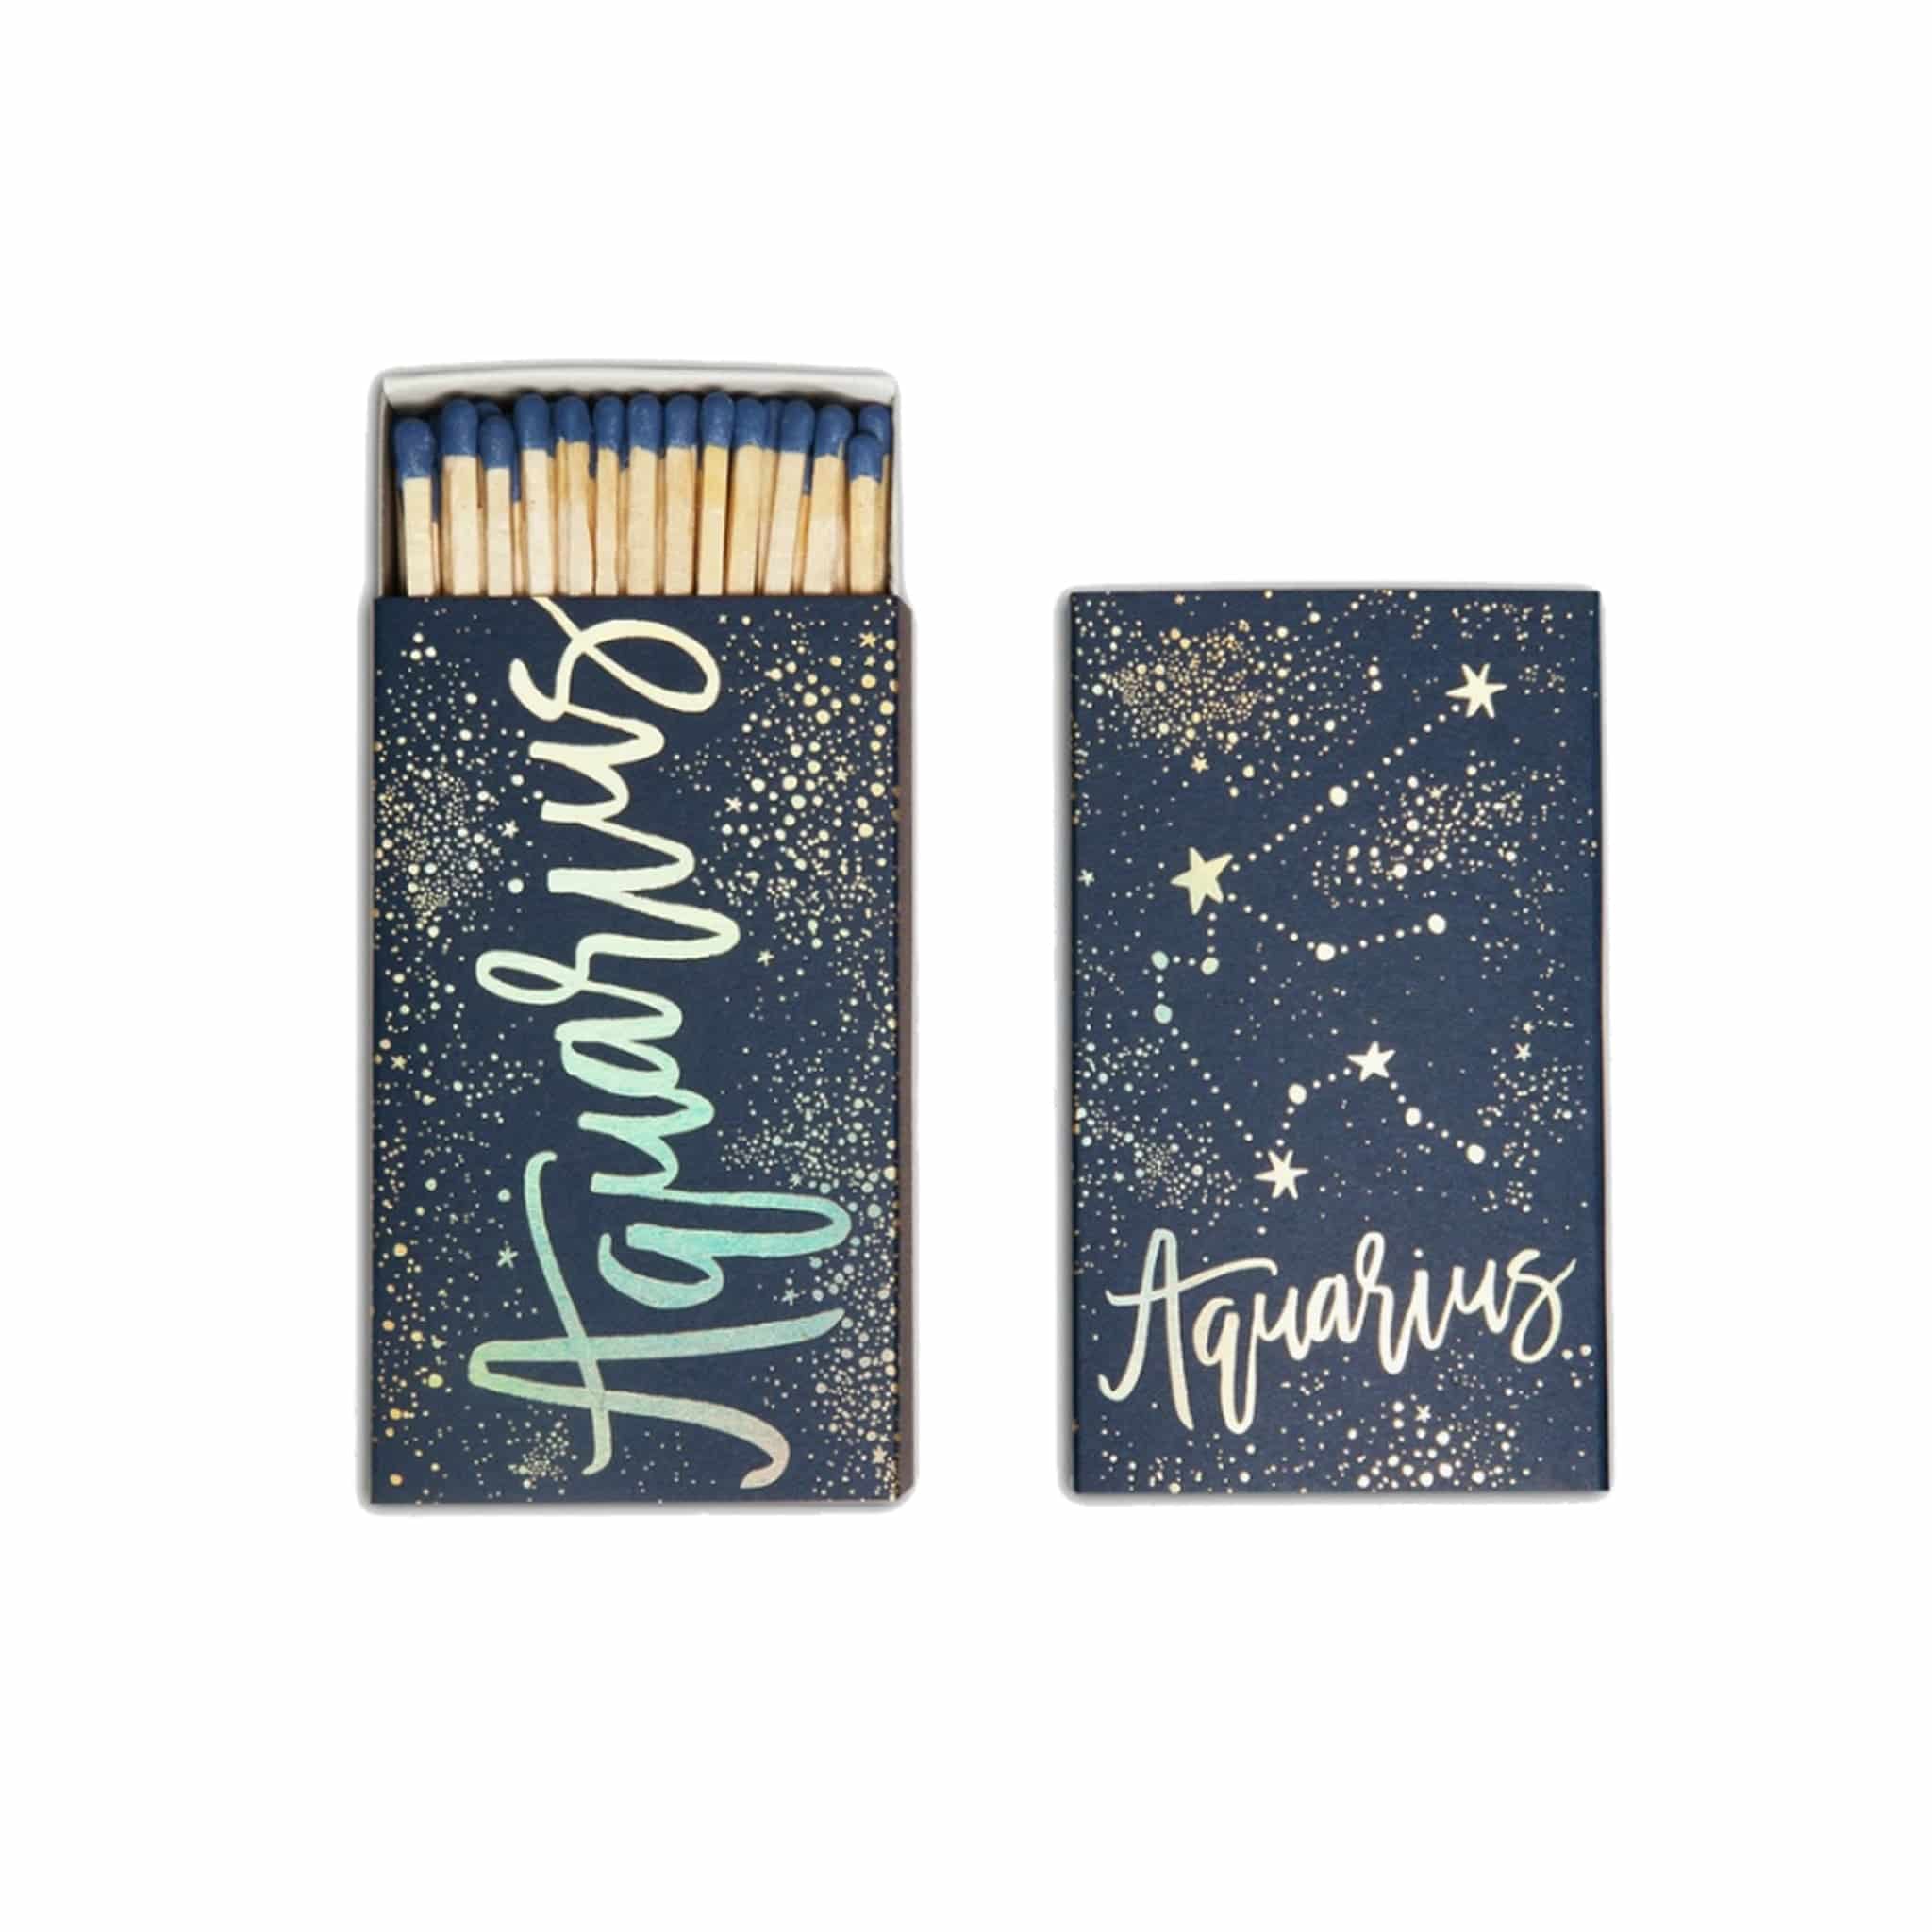 Aquarius Zodiac Matchbook - Extra Large 4.5" Cigar Matches - The Gilded Witch